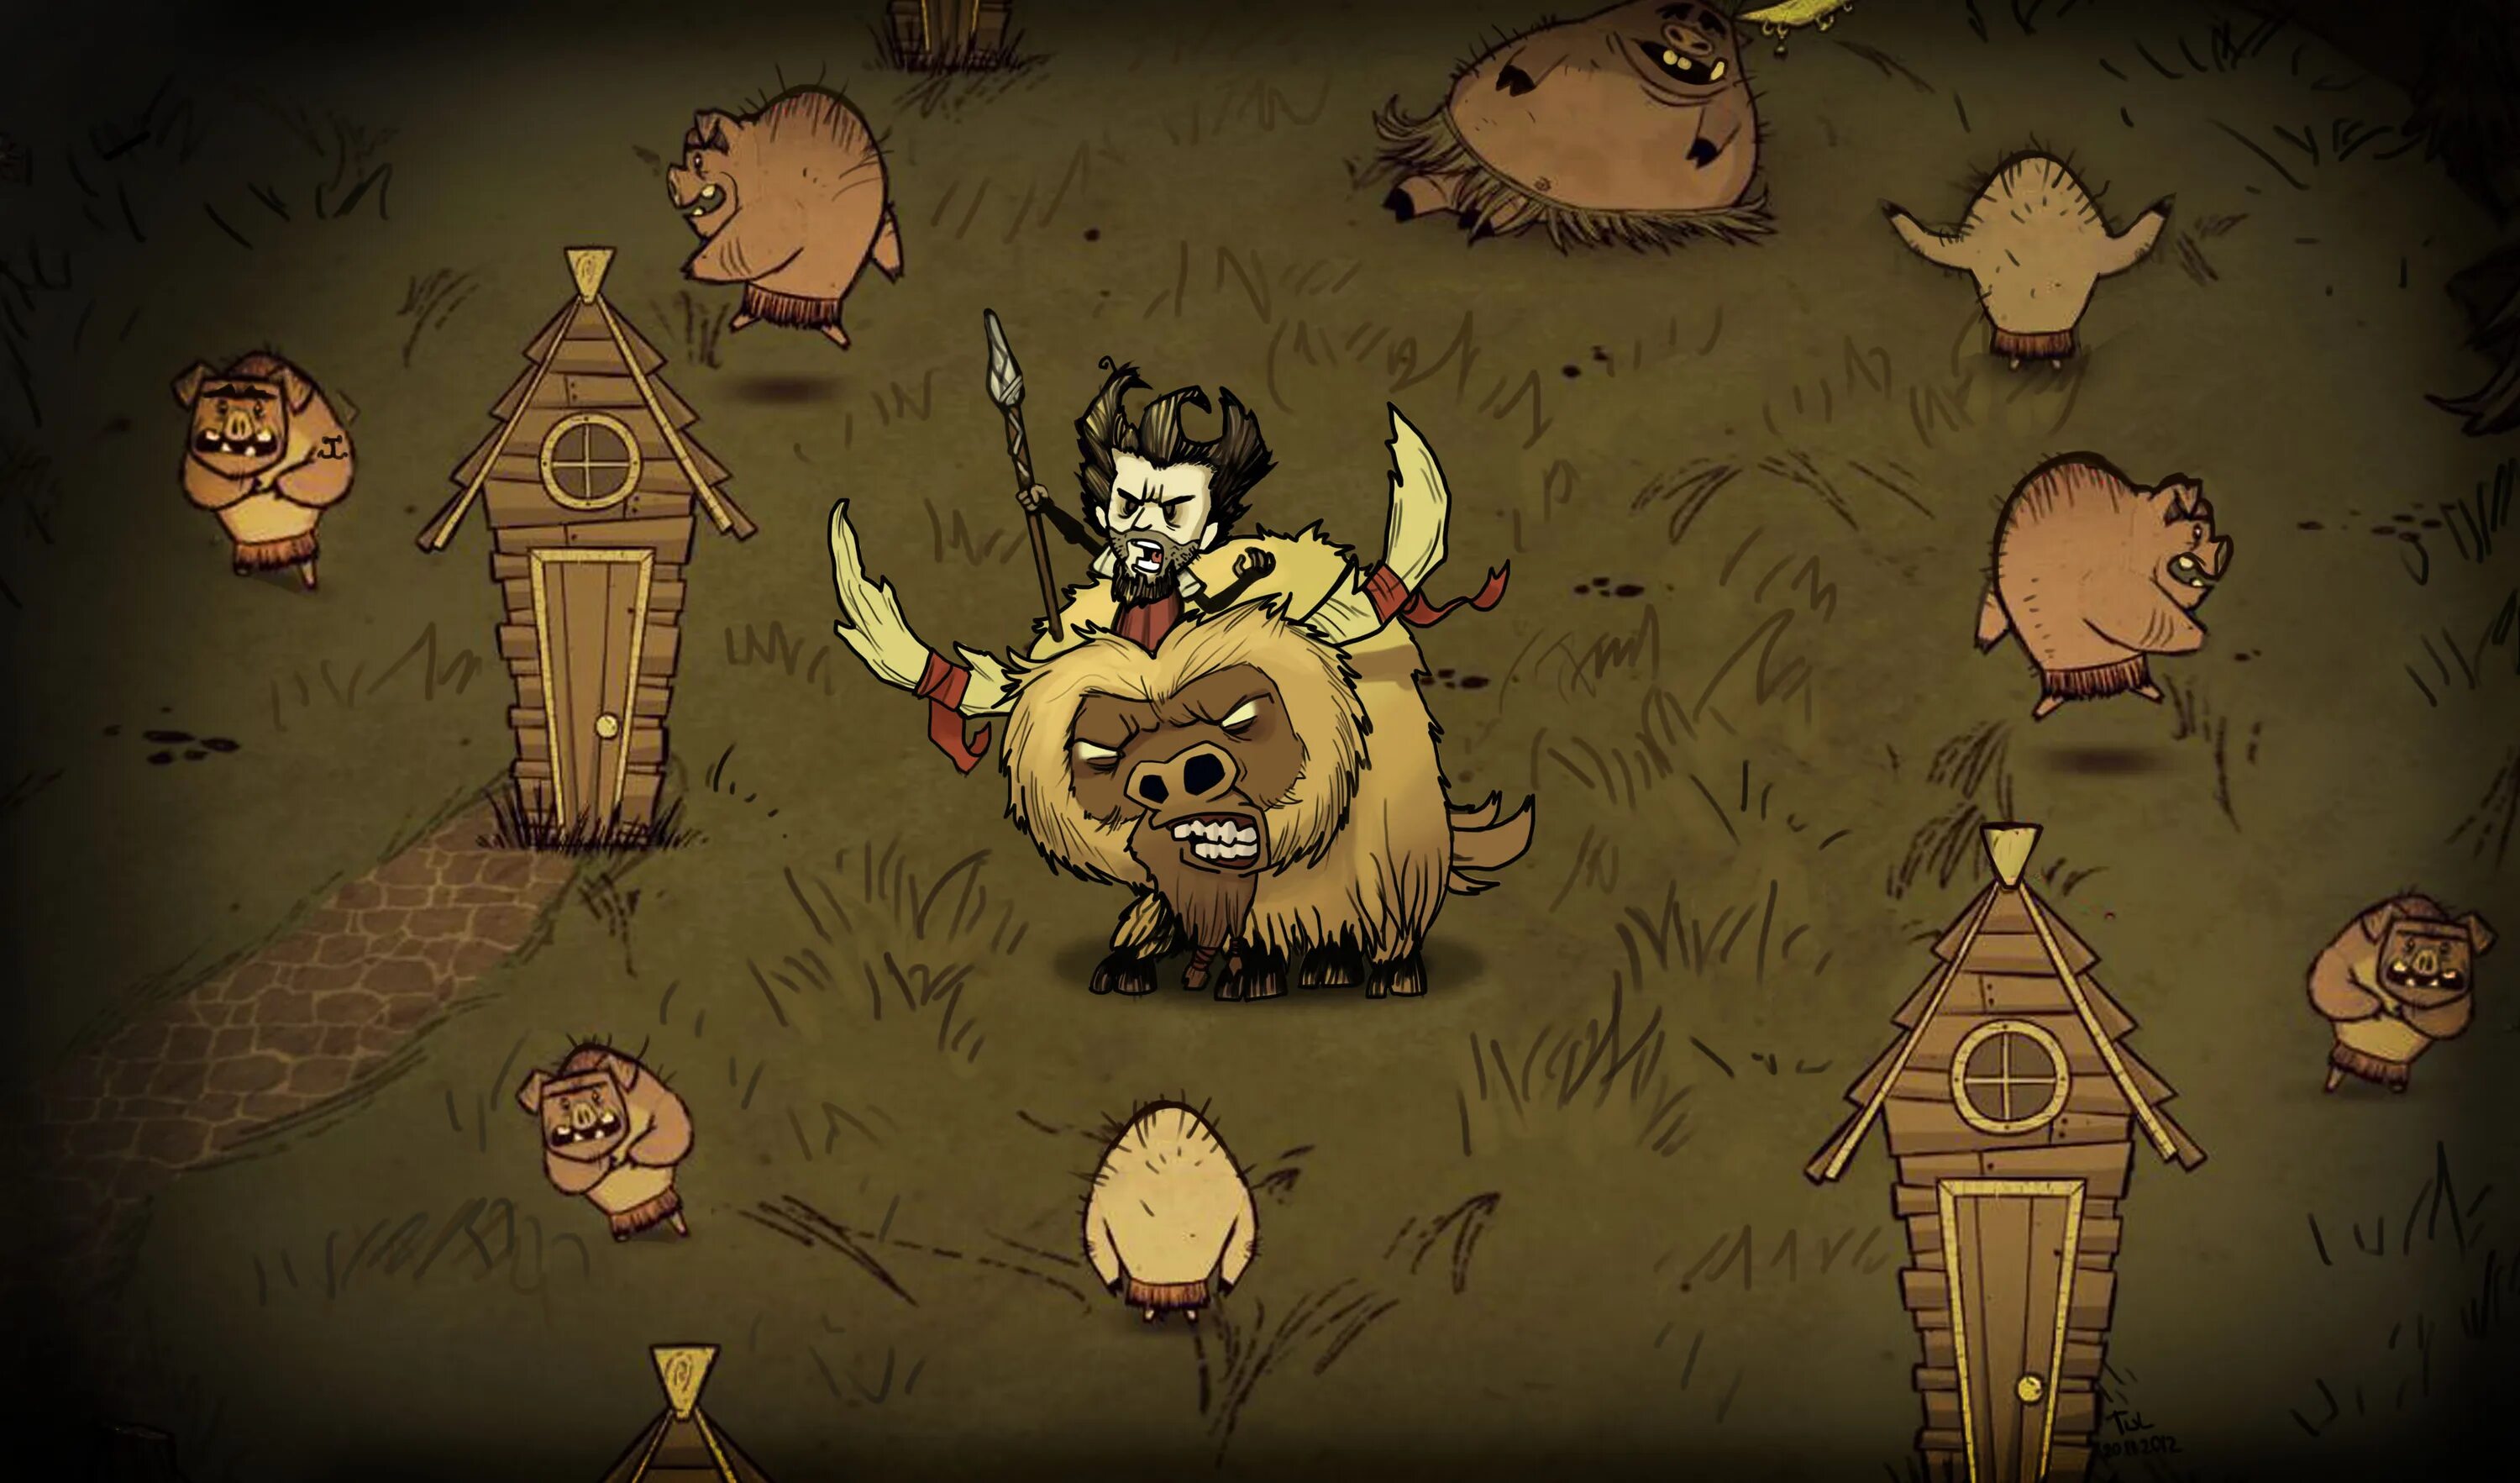 Don t starve starving games. Донт старв. Don t Starve игра. Don't Starve [Hamlet, 3 остров. Донт старв гиганты.